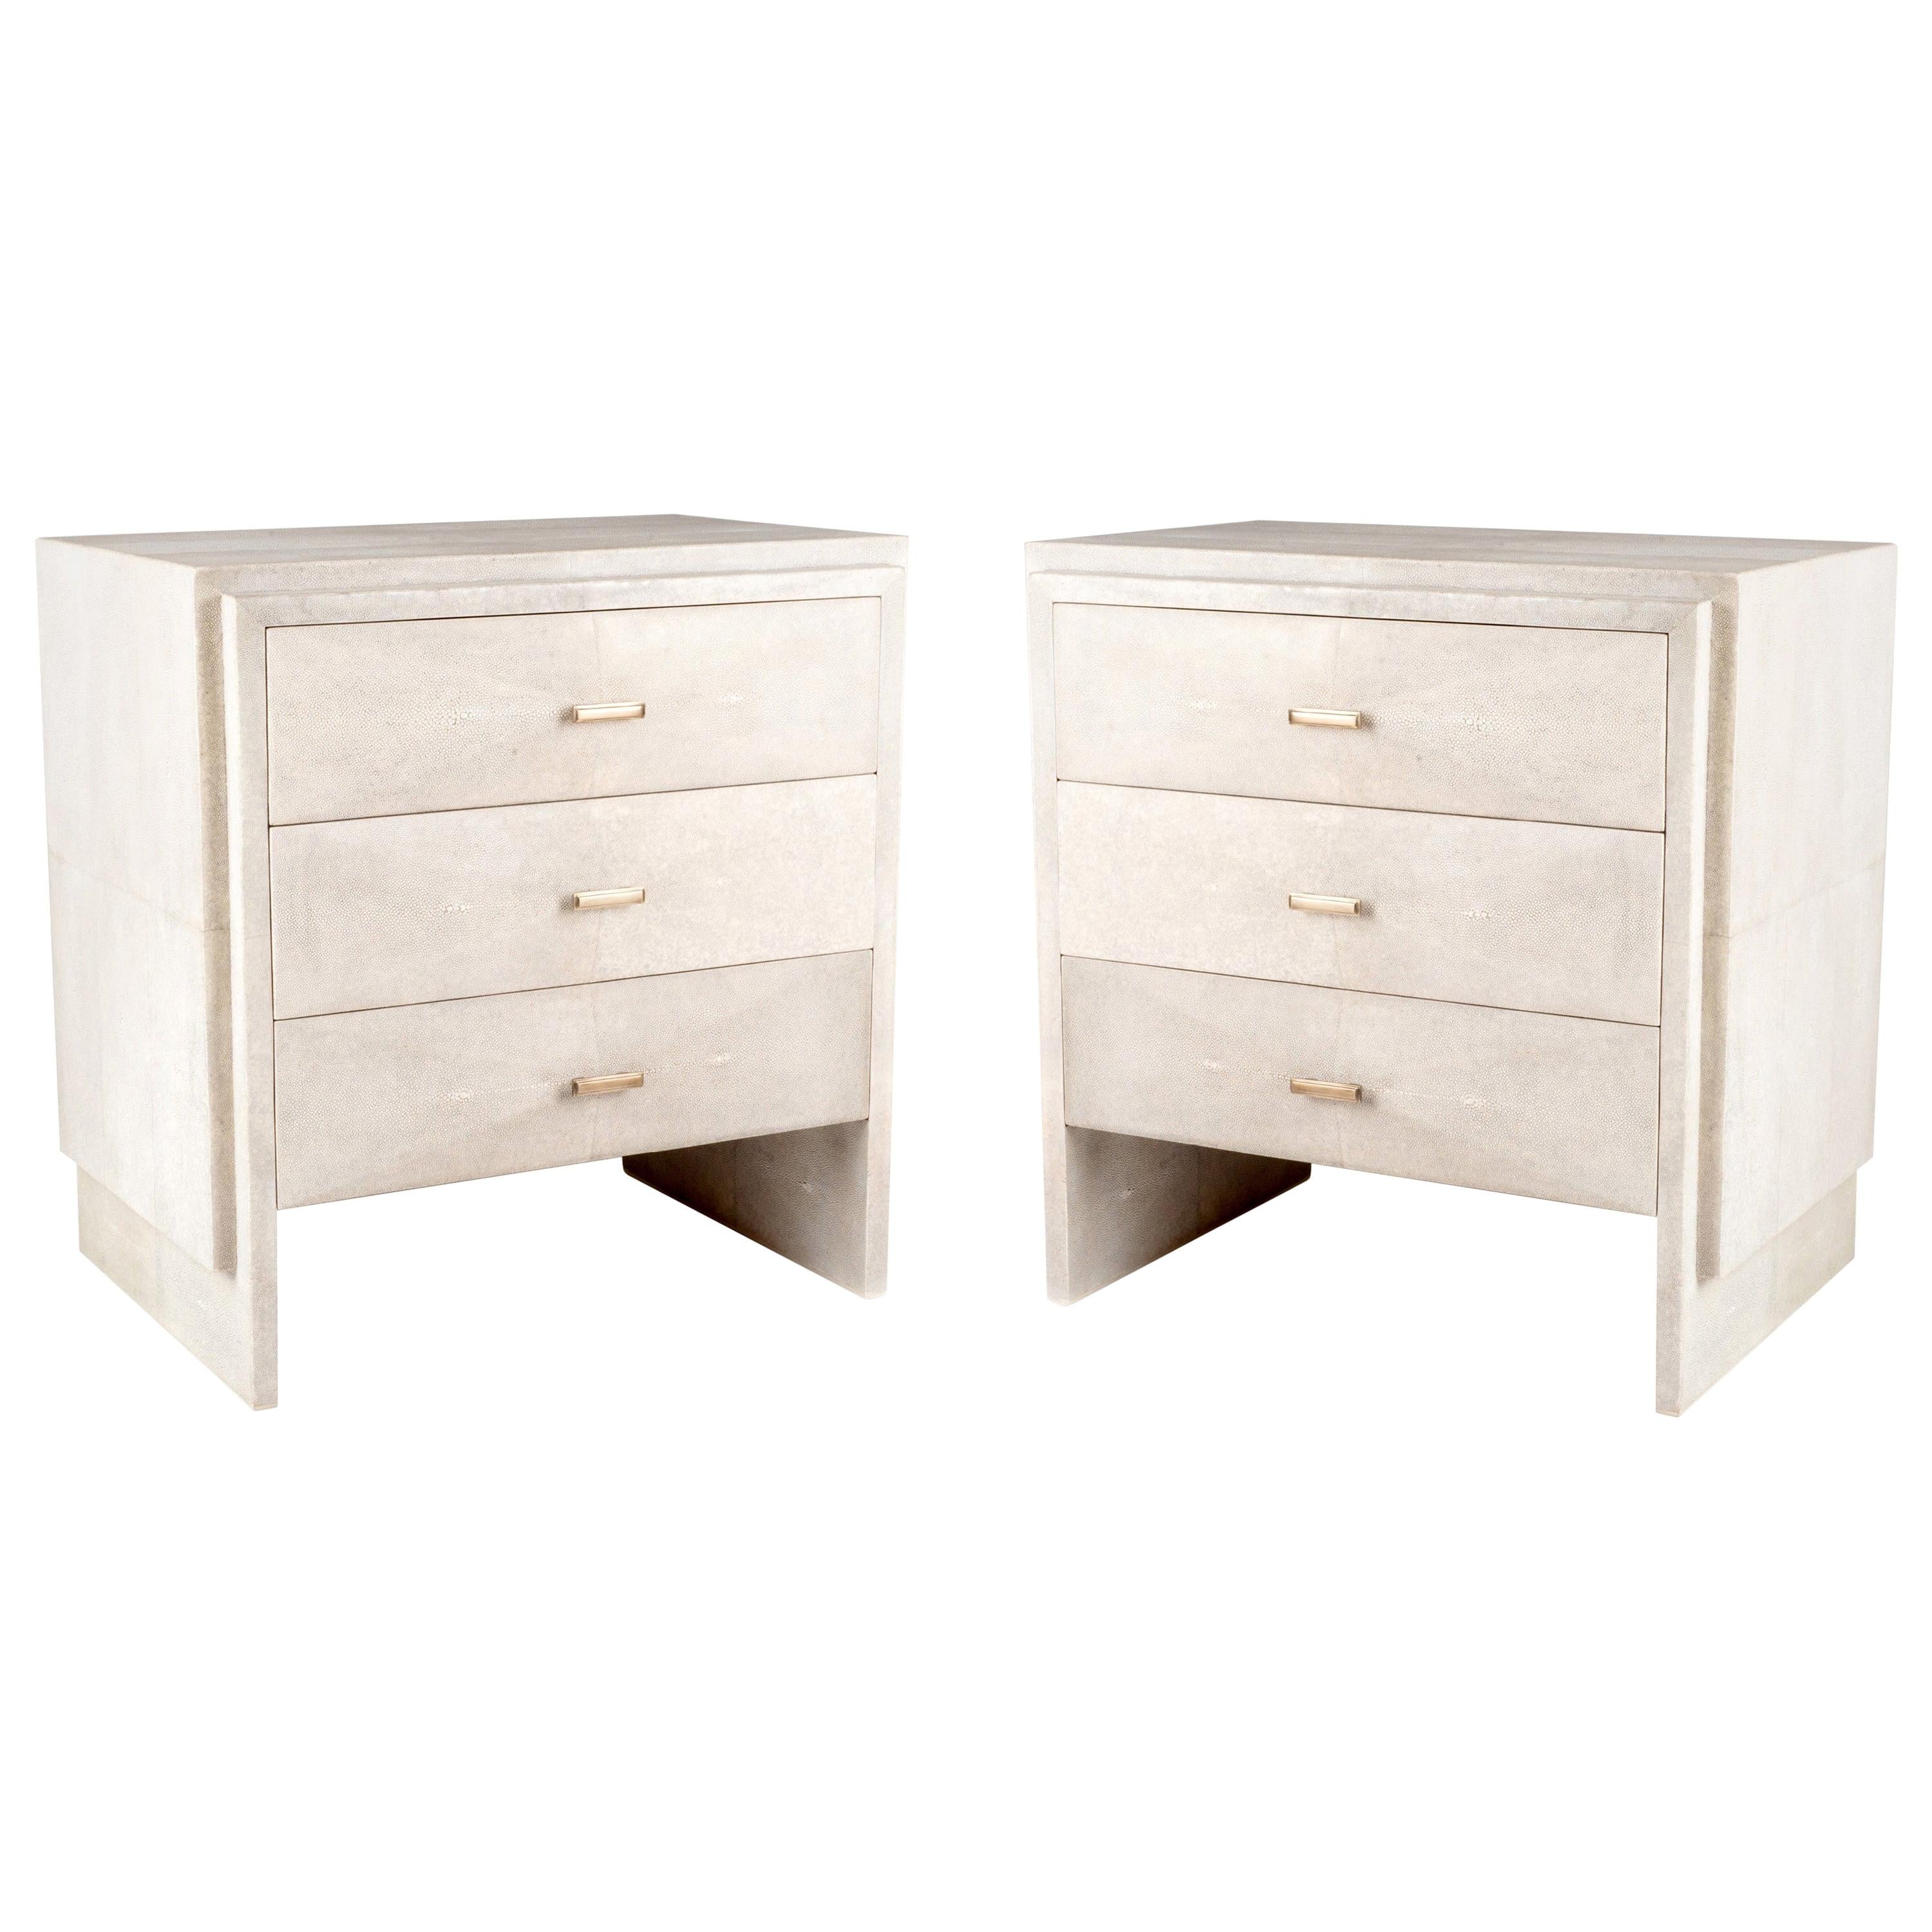 Set of Two Shagreen Nightstands with Beveled Drawers by R&Y Augousti